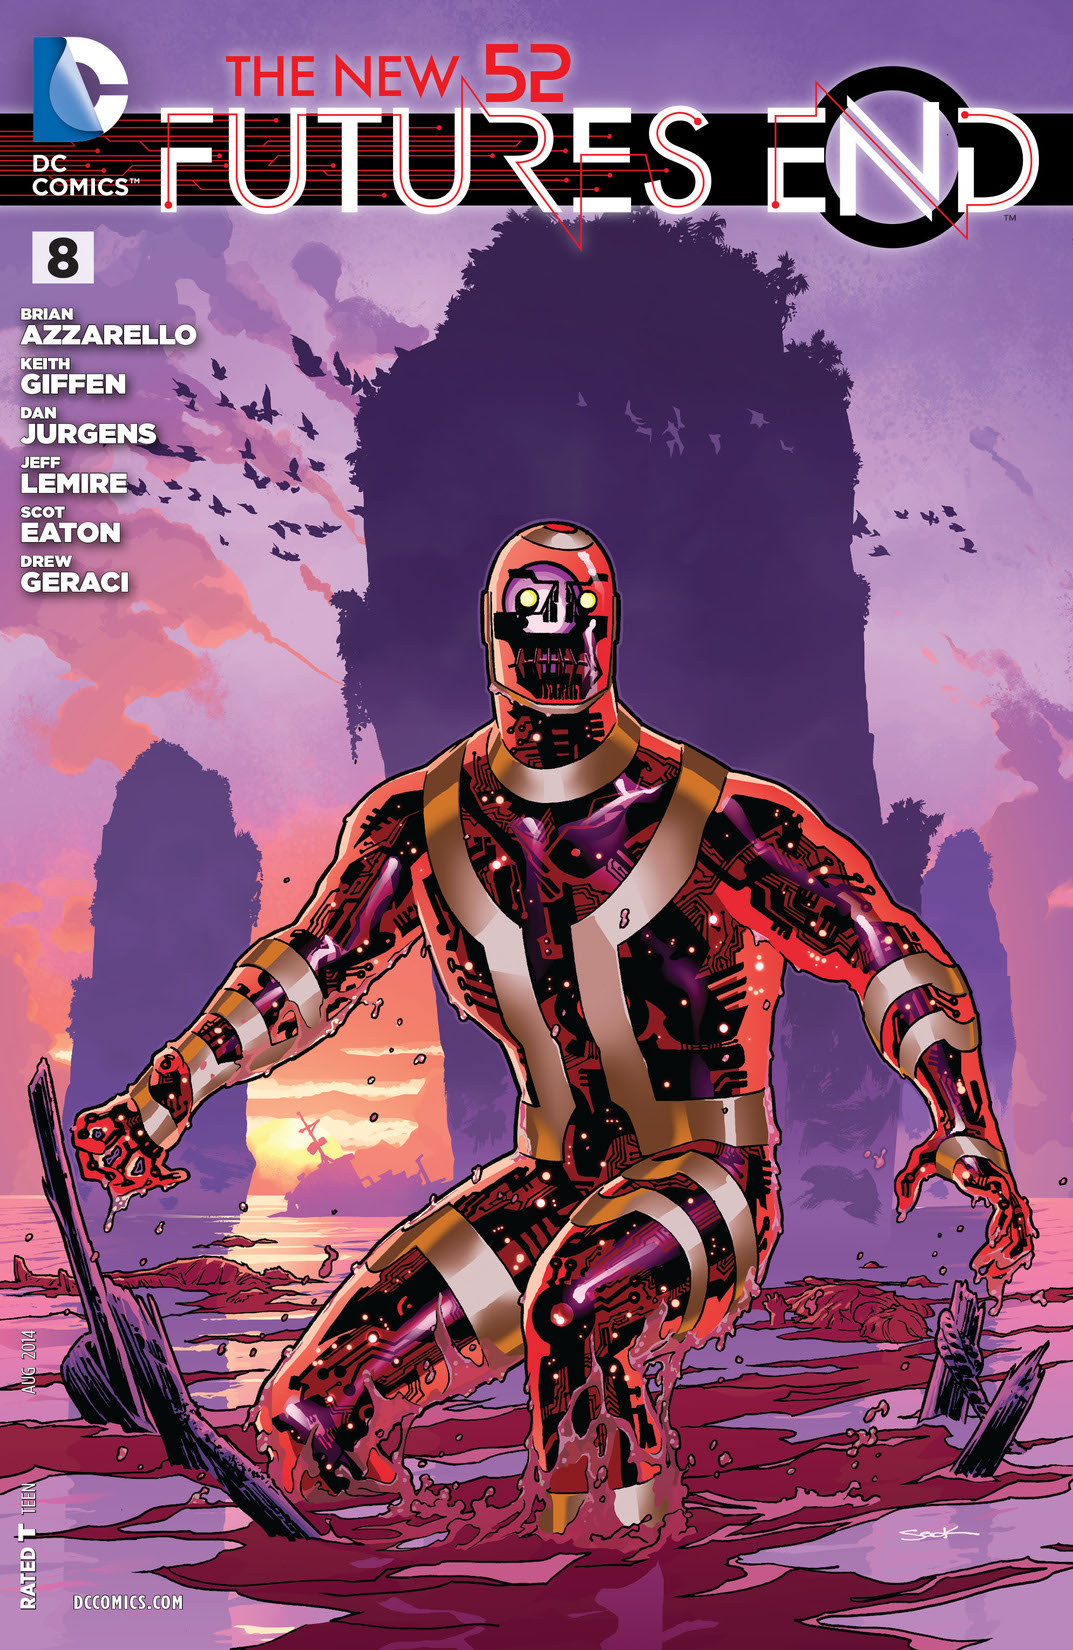 The New 52: Futures End #8 preview images